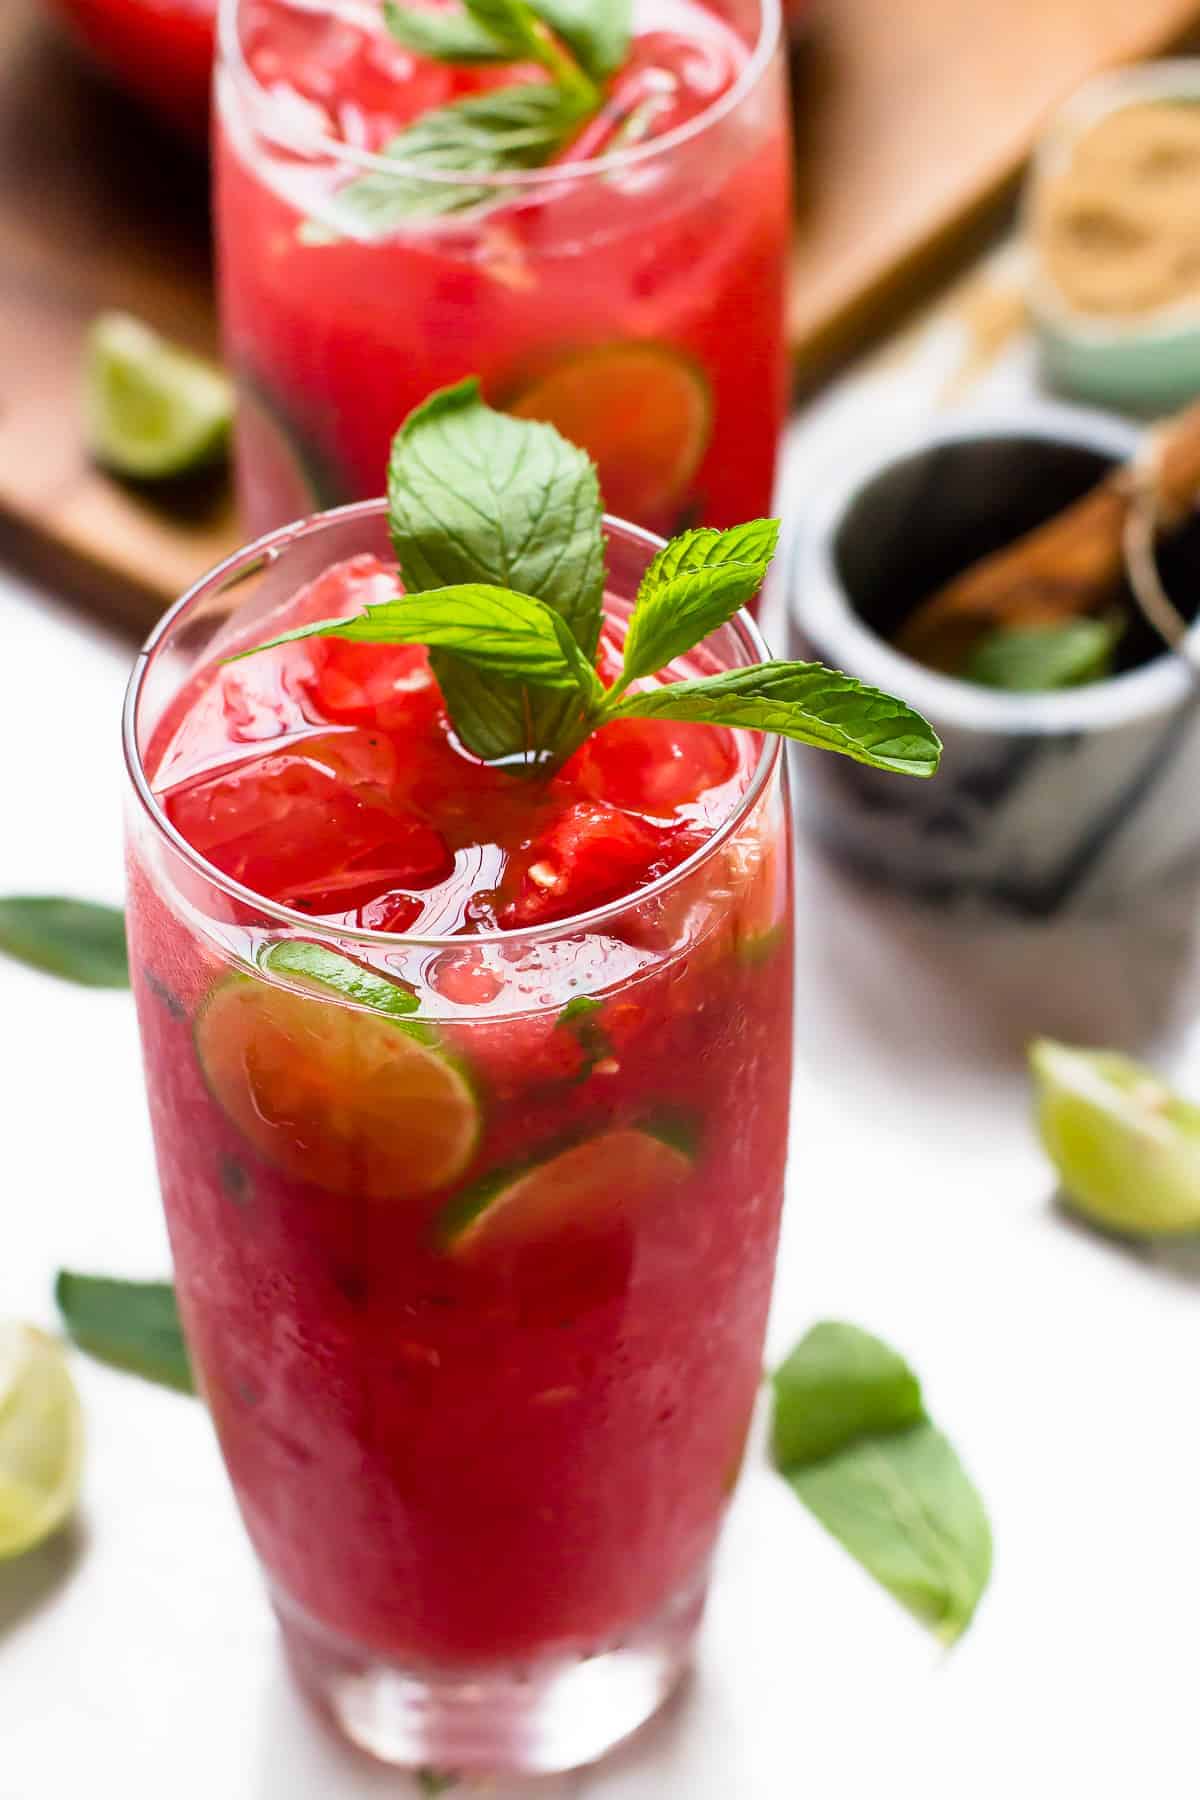 Watermelon mojito garnished with sprig of mint and limes